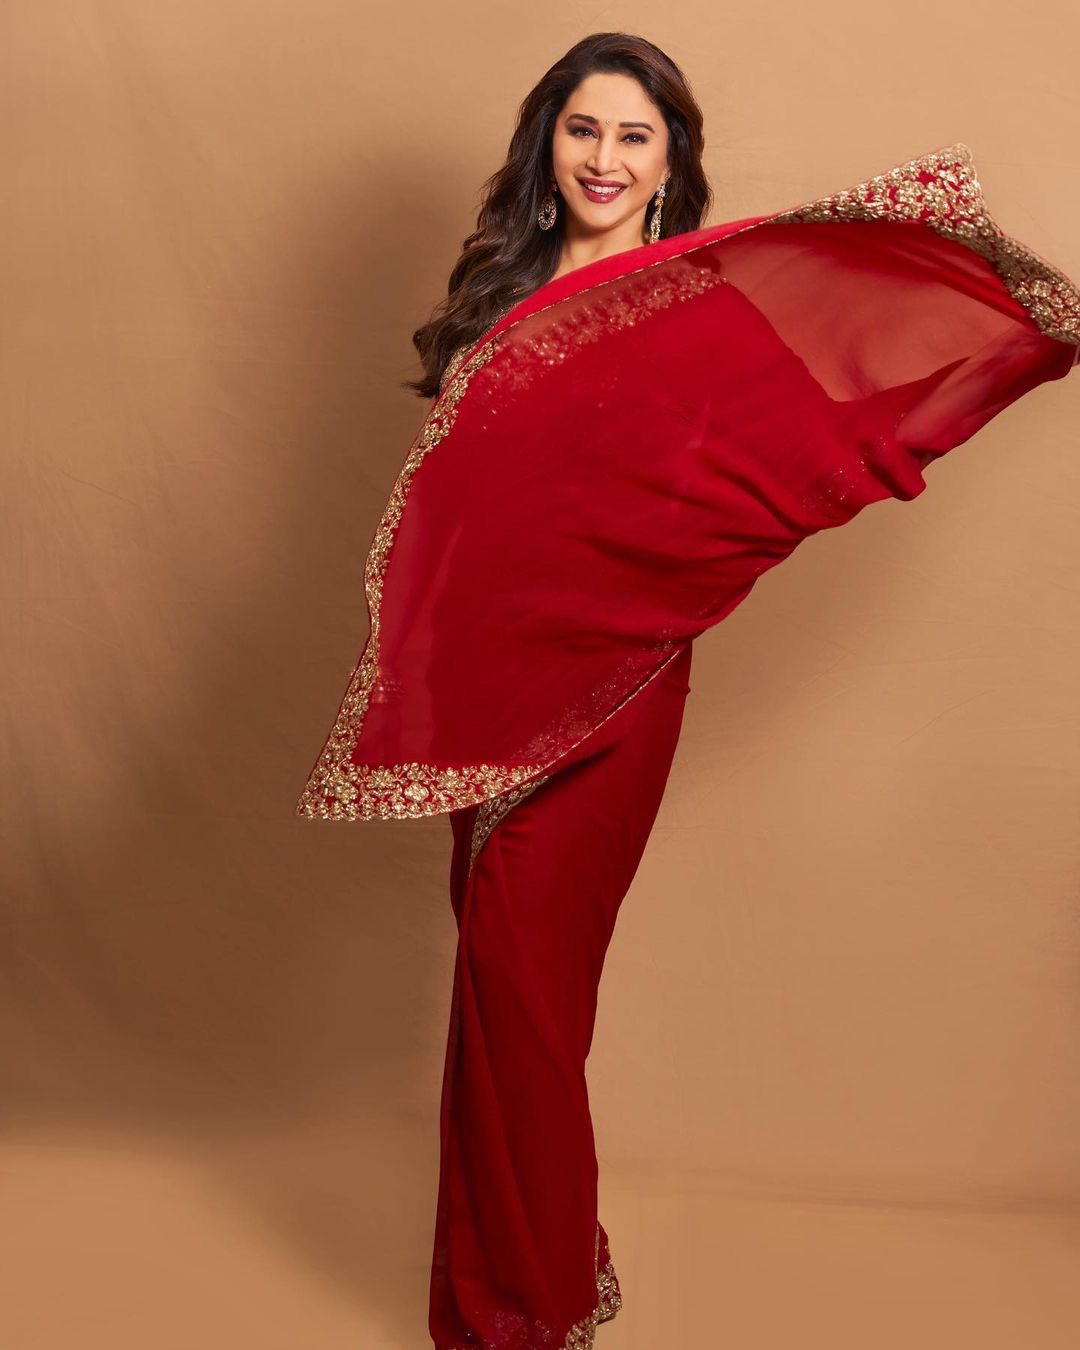 Buy Red Georgette Saree online at Best Prices in India